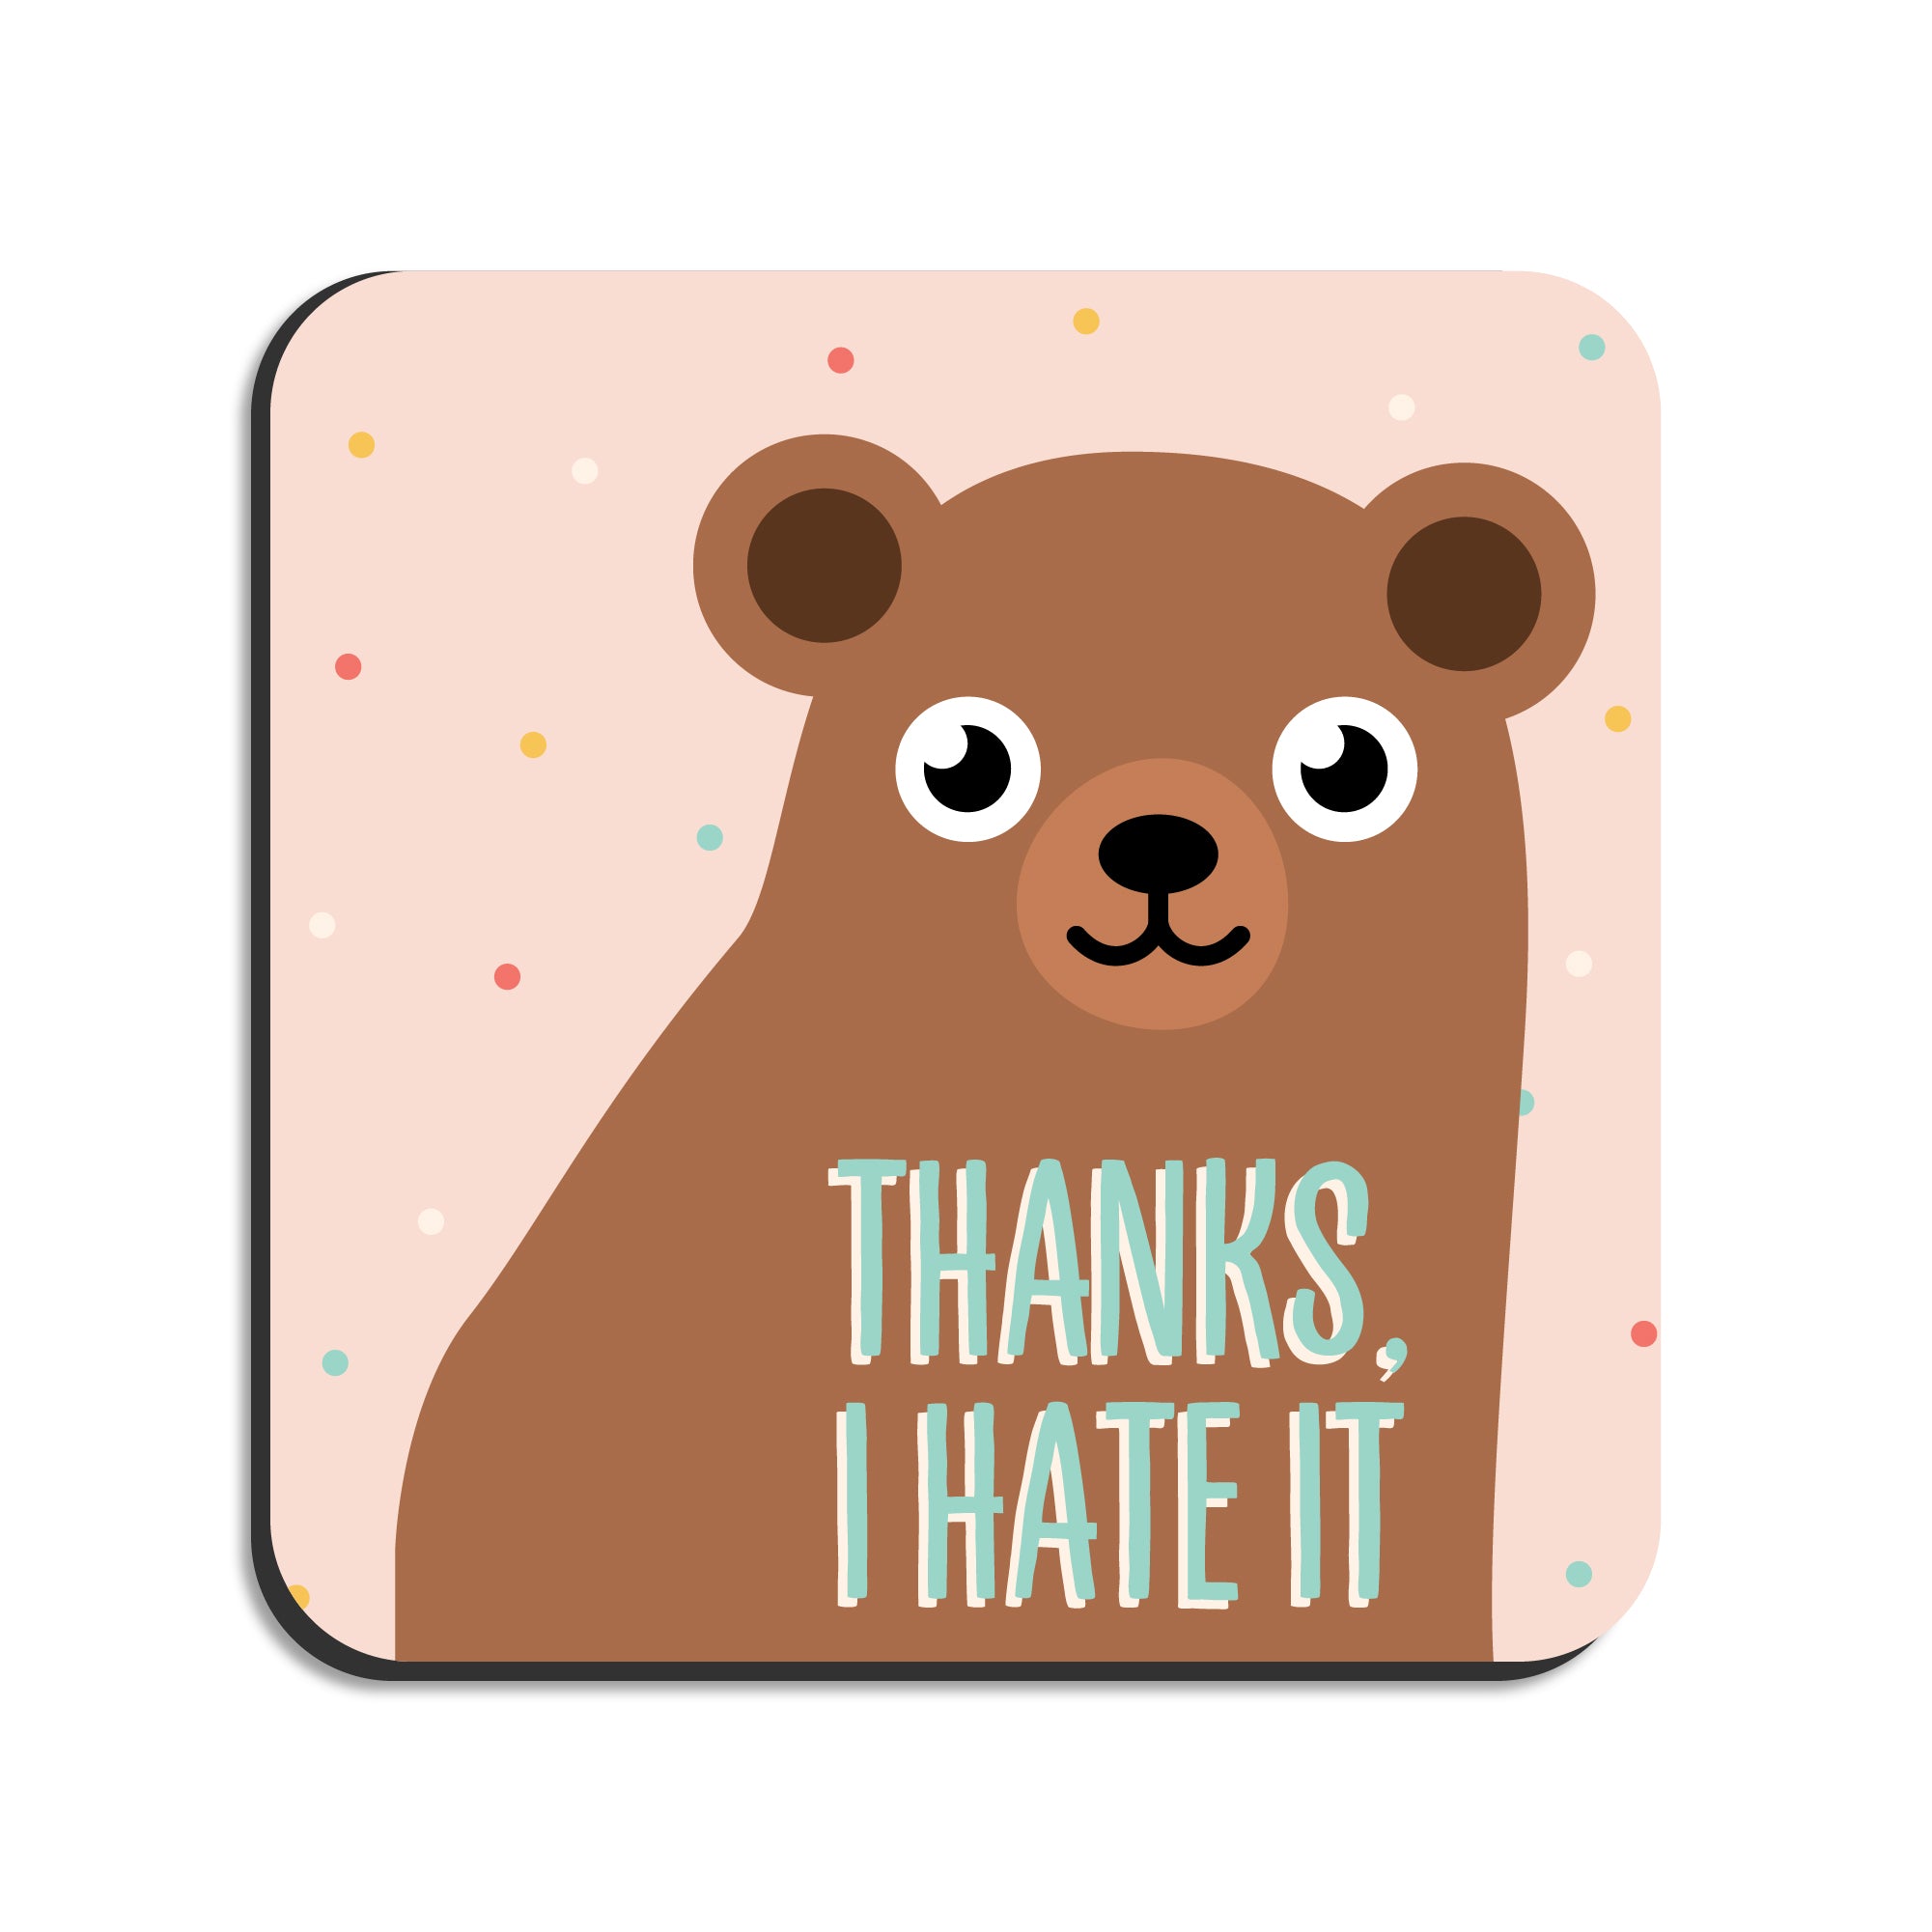 Thanks, I hate it magnet by I&